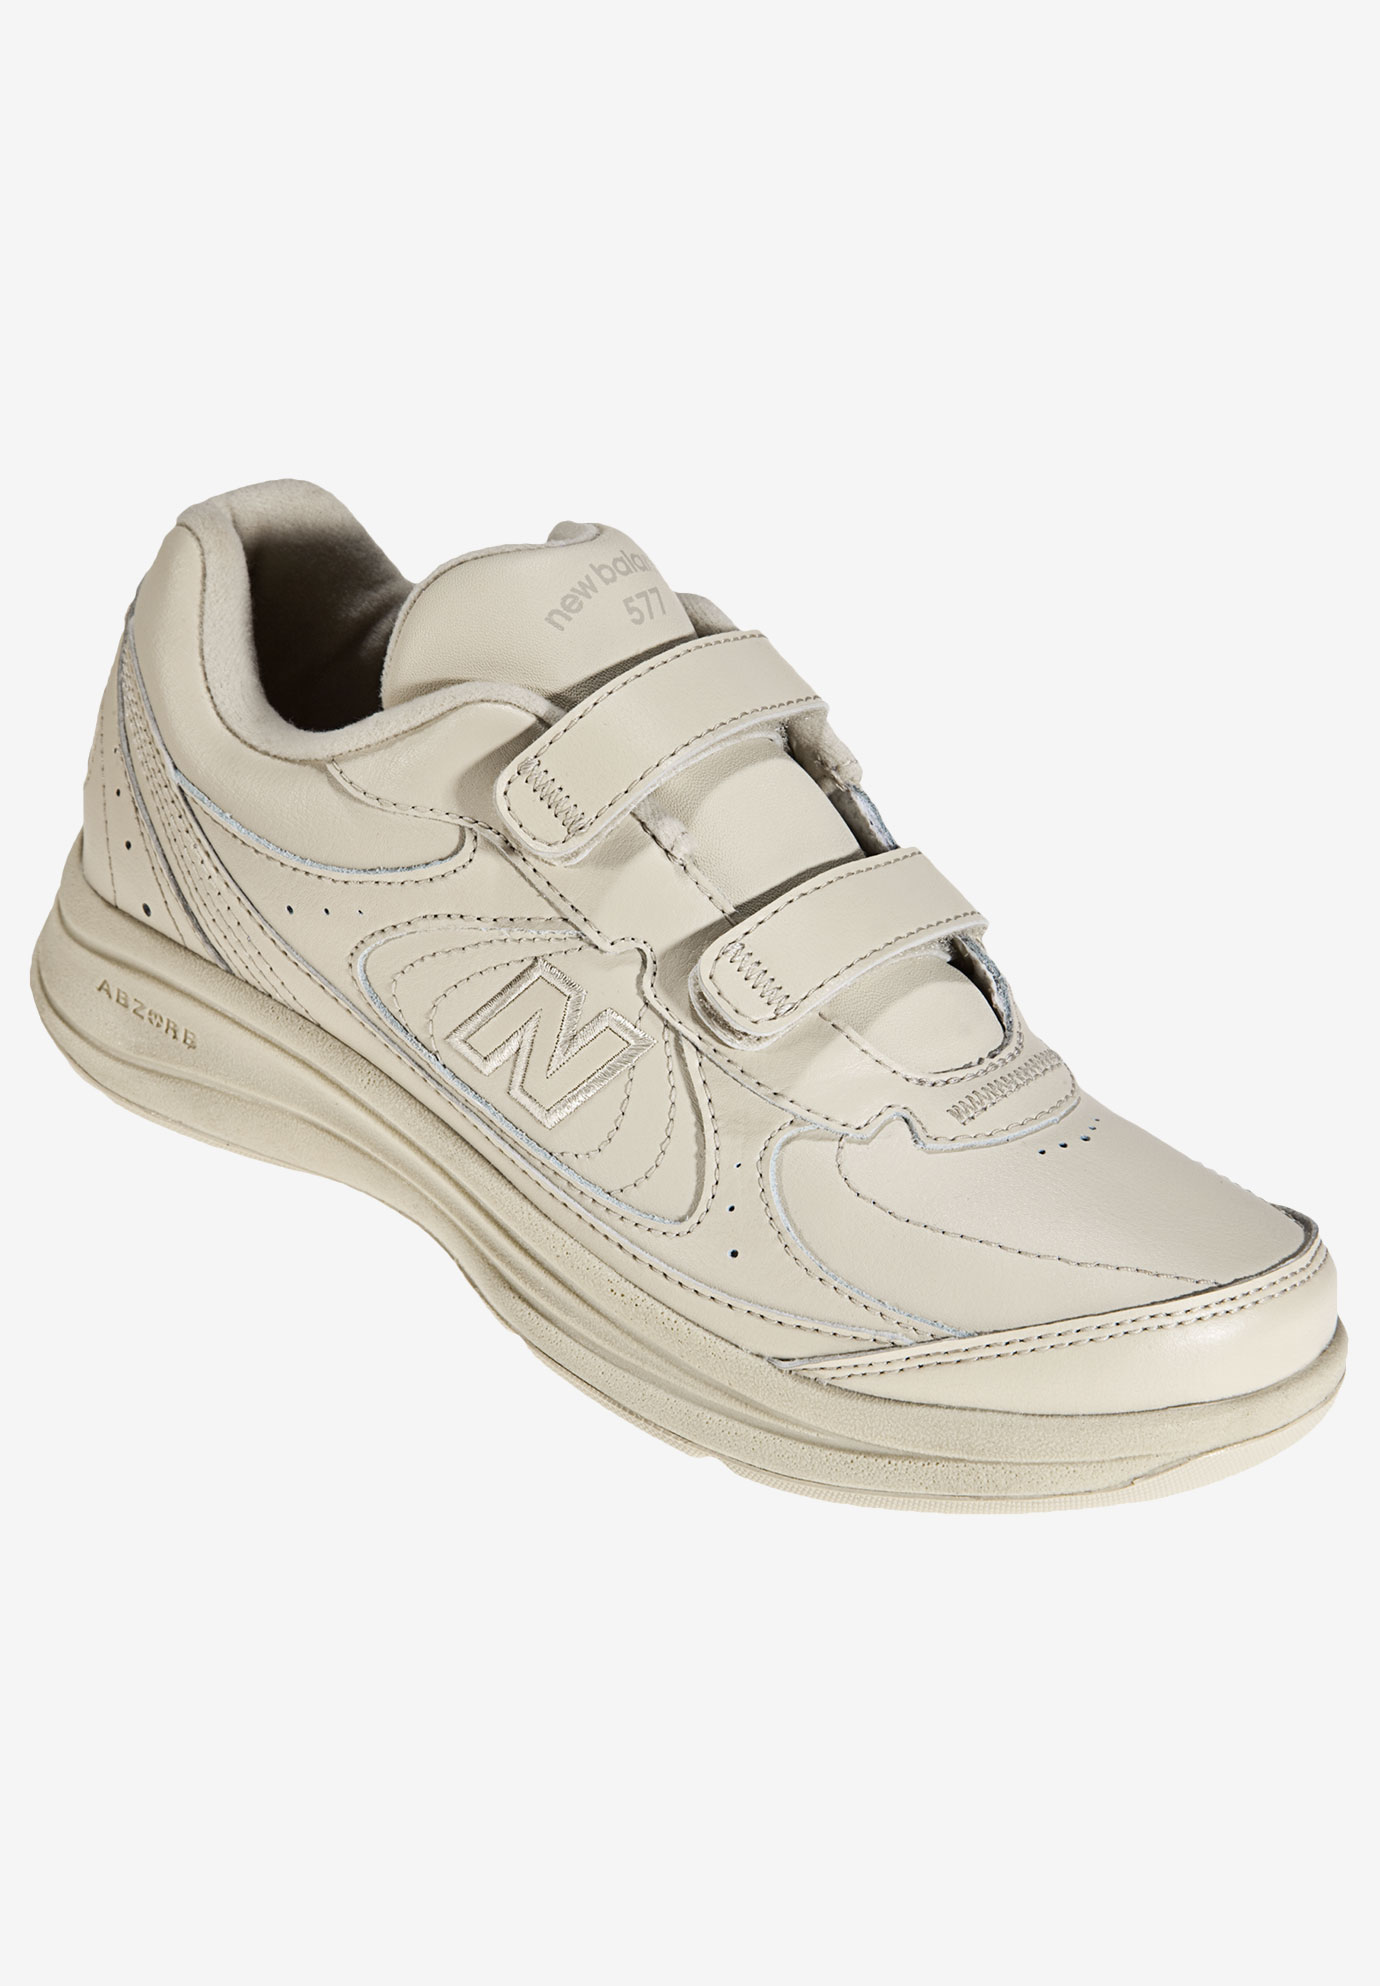 New Balance® 577 Velcro Walking Shoes| Big and Tall Shoes & Accessories ...